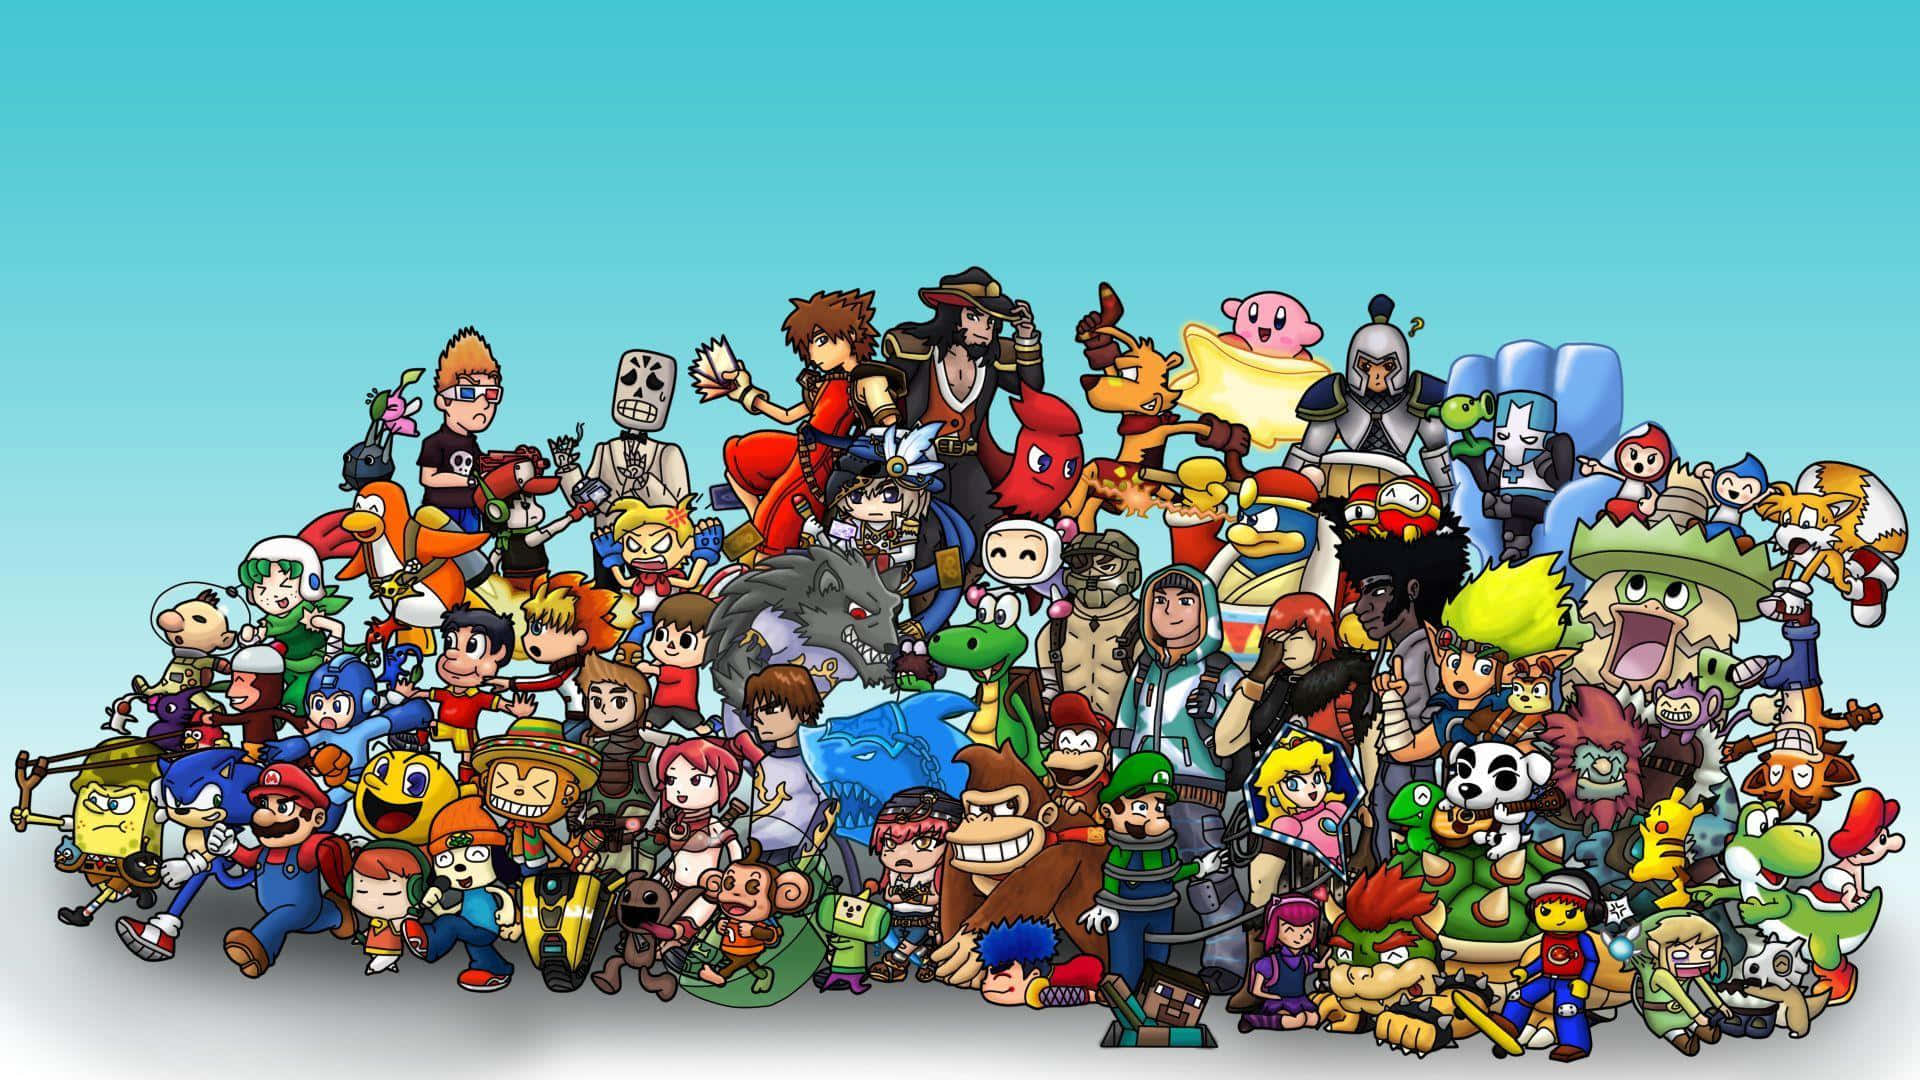 Unite your gaming community with All Games Wallpaper